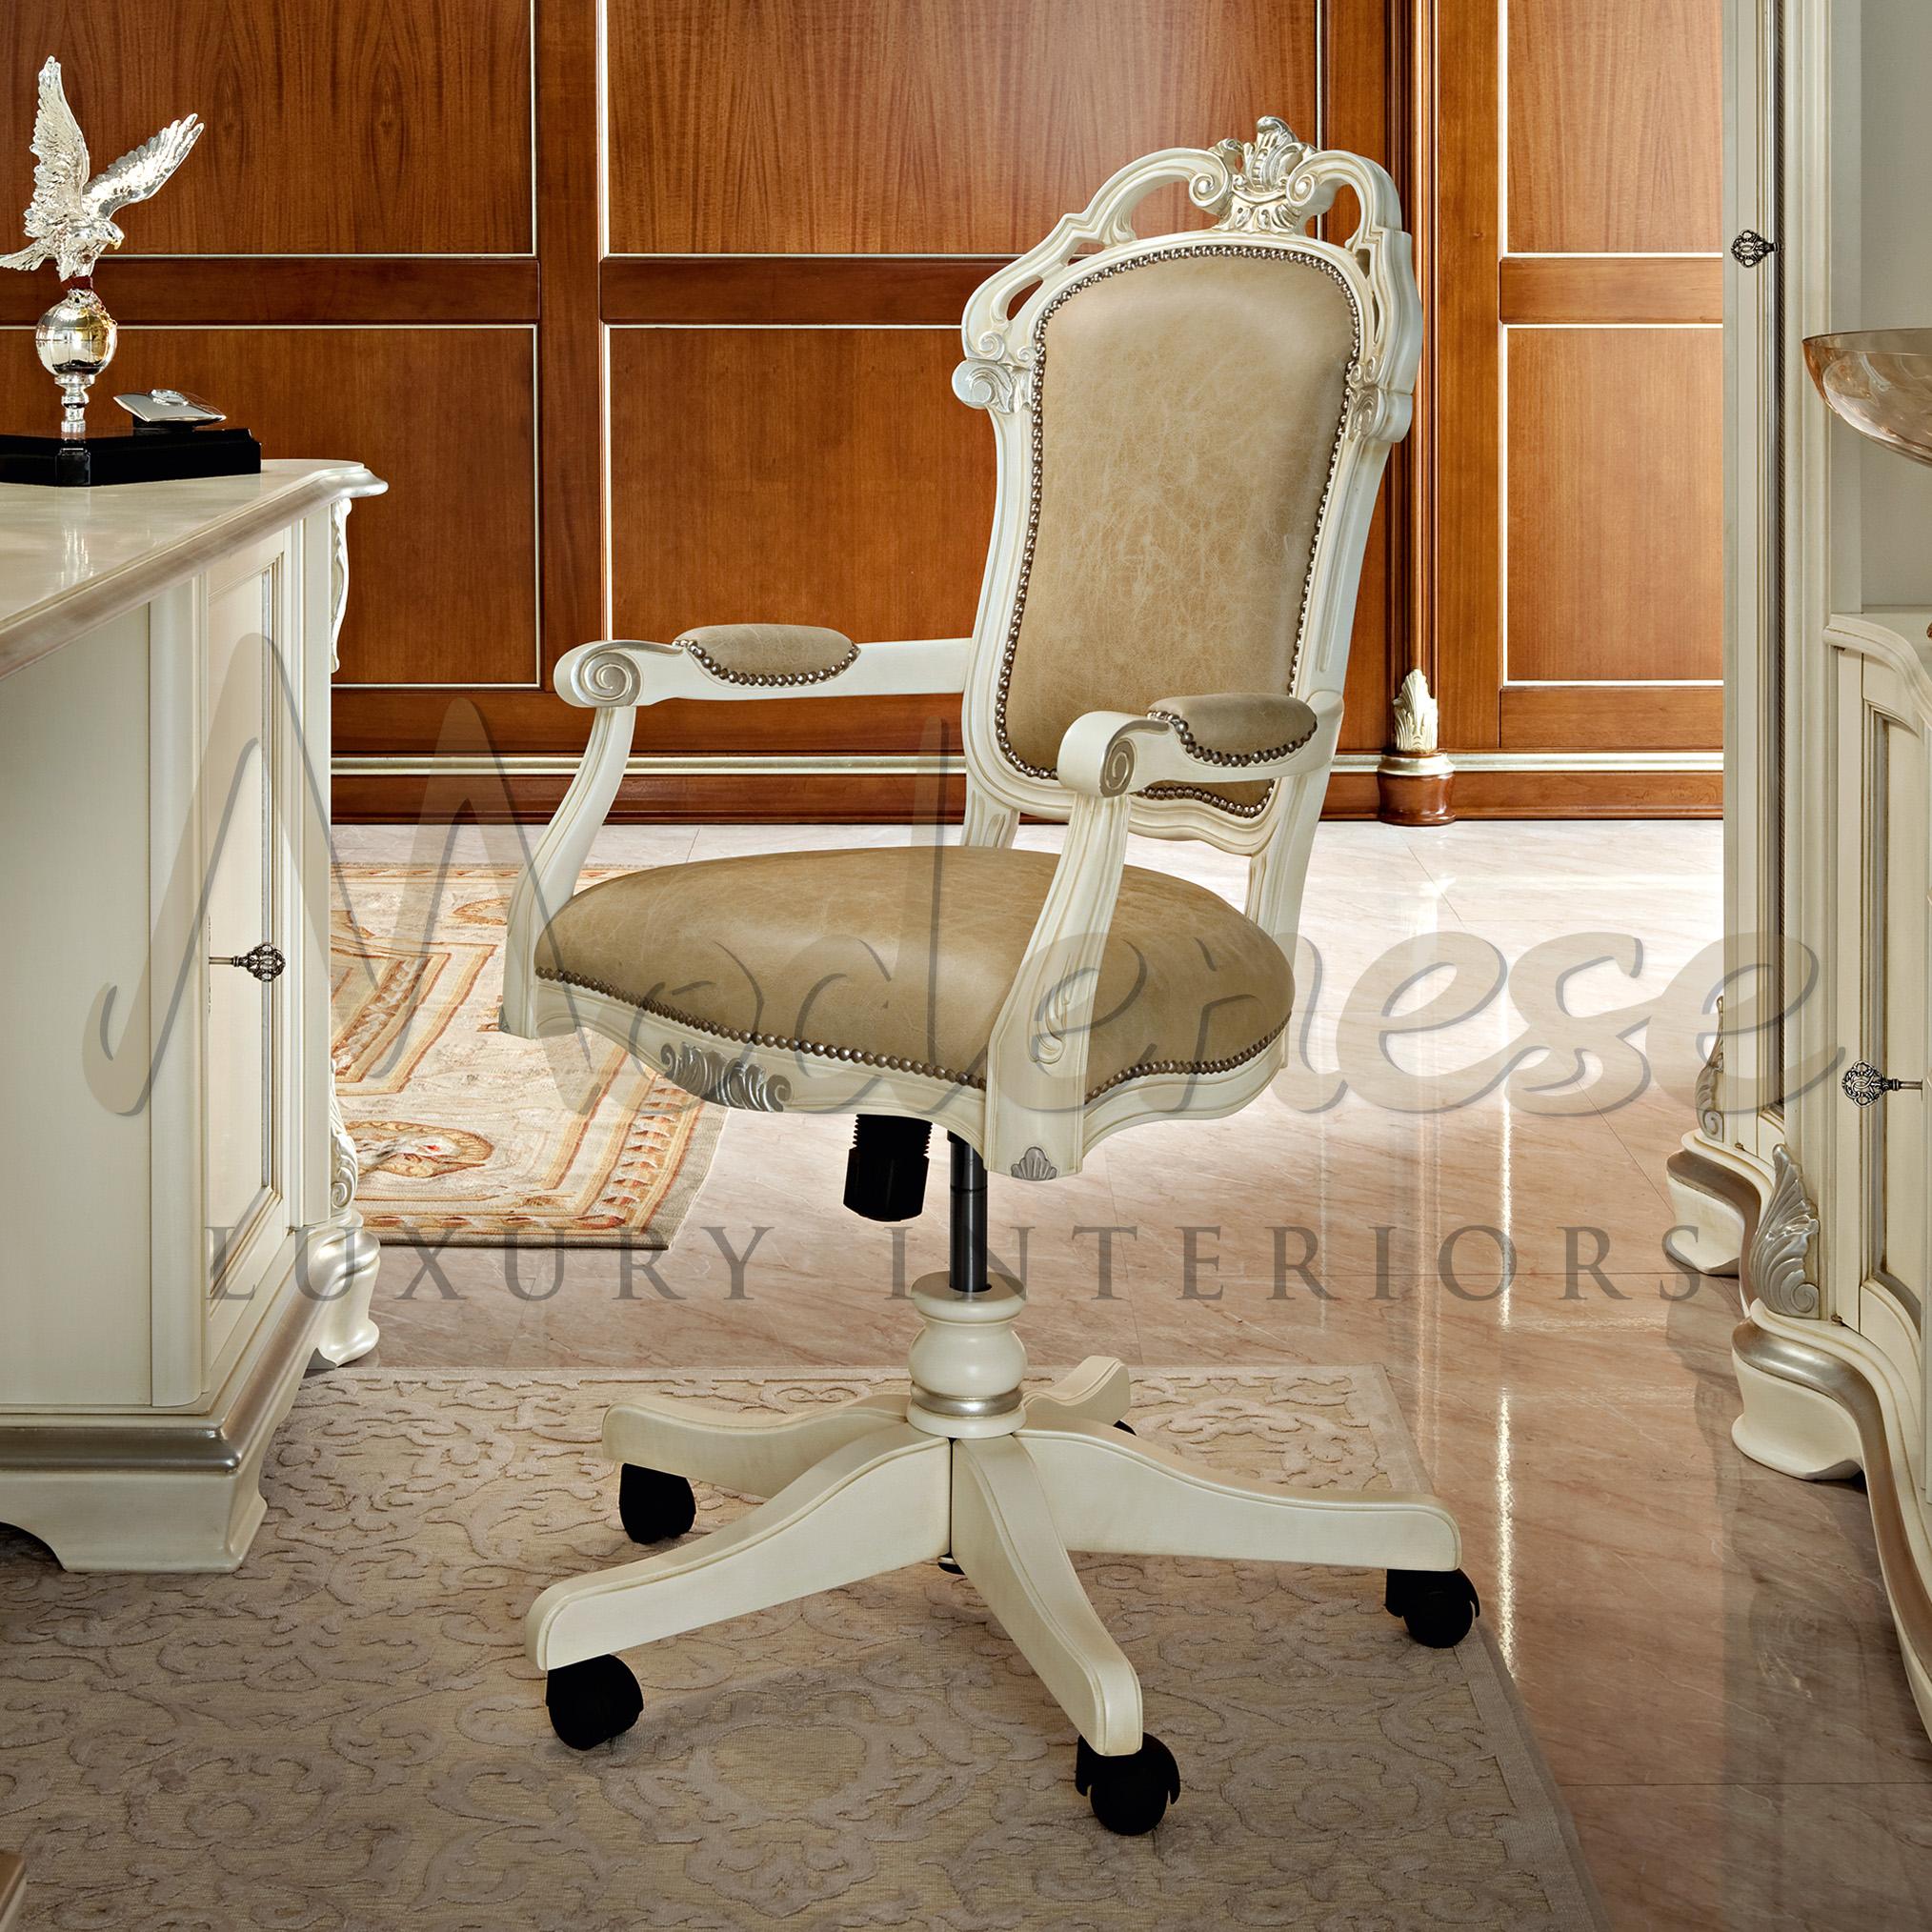 Real cream-coloured leather office swivel chair with armrest featuring ivory finishings, gold leaf details and carved decorations. Designed and produced with the best quality materials by Modenese Gastone Luxury Interiors, leader Italian homeware